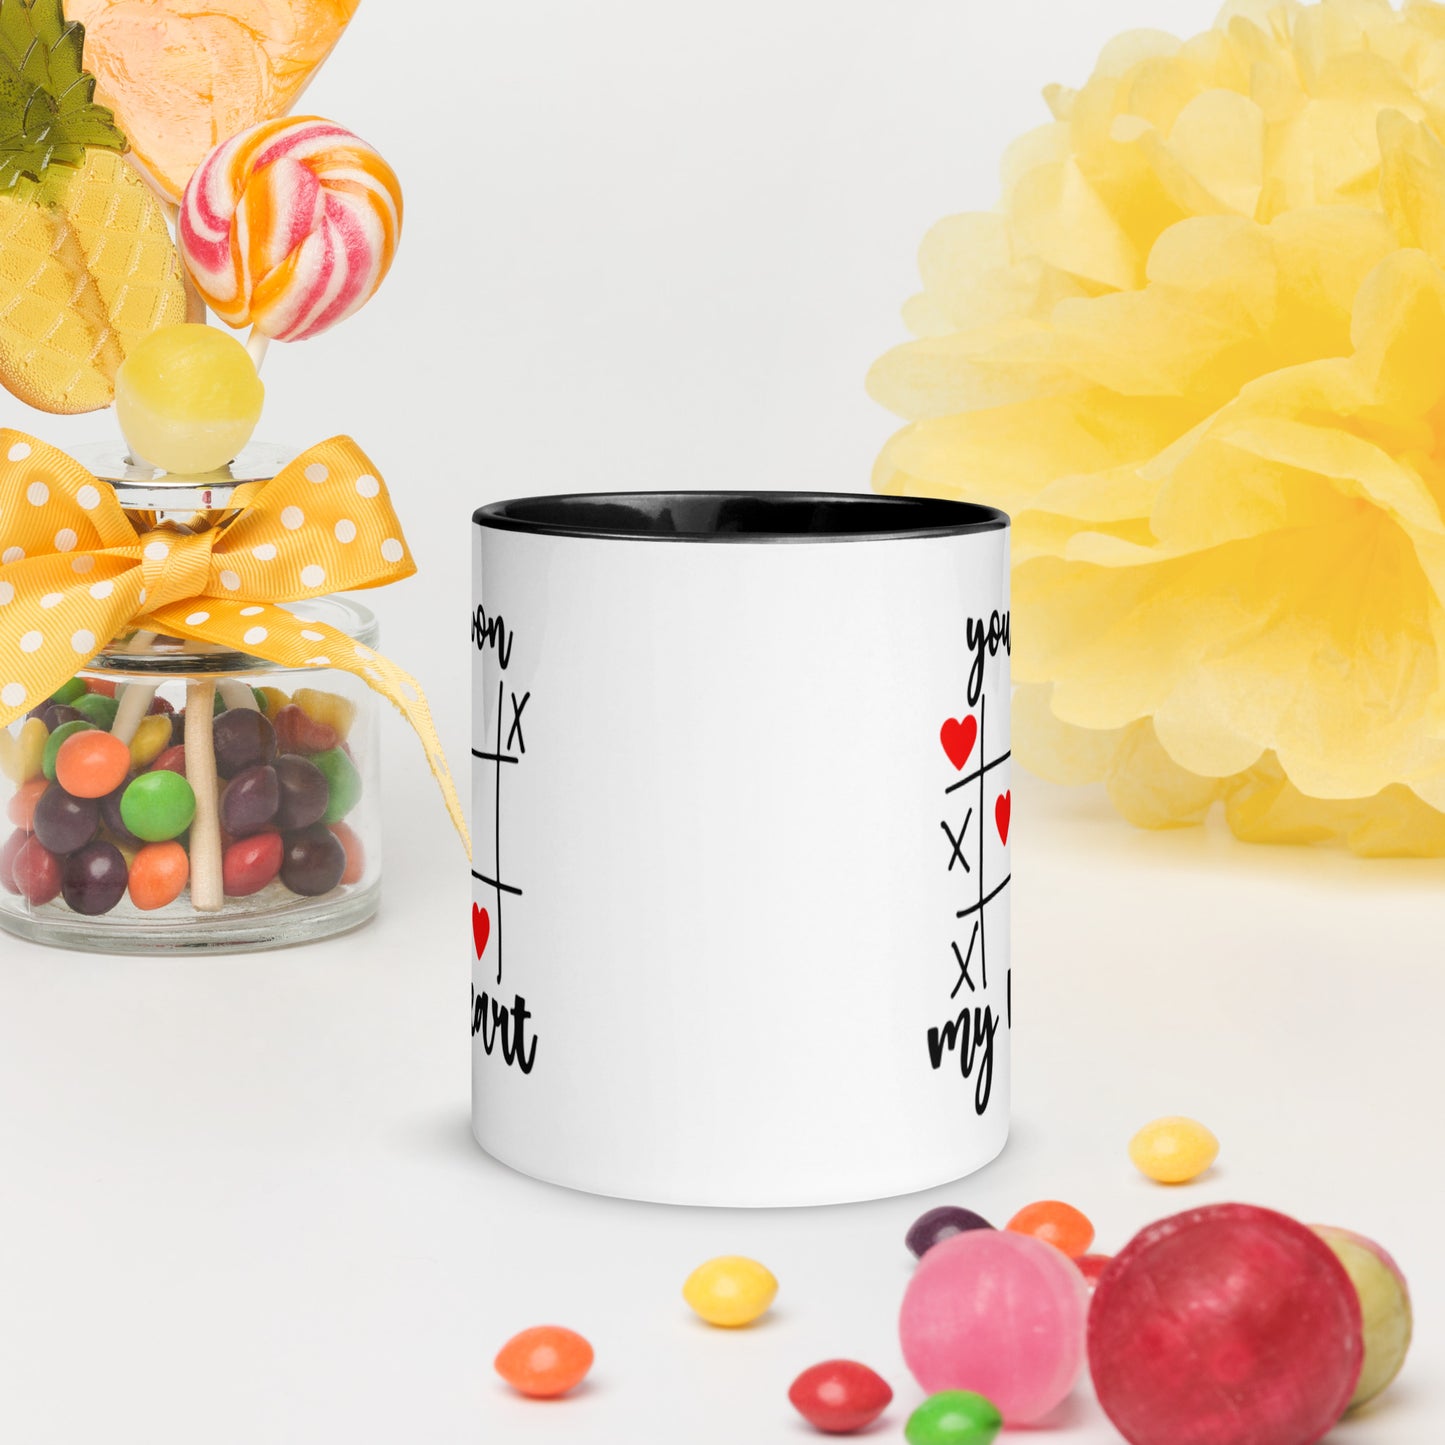 You Won My Heart Tic-Tac-Toe Game Happy Valentines Day Lovers Heart Coffee Mug with Color Inside